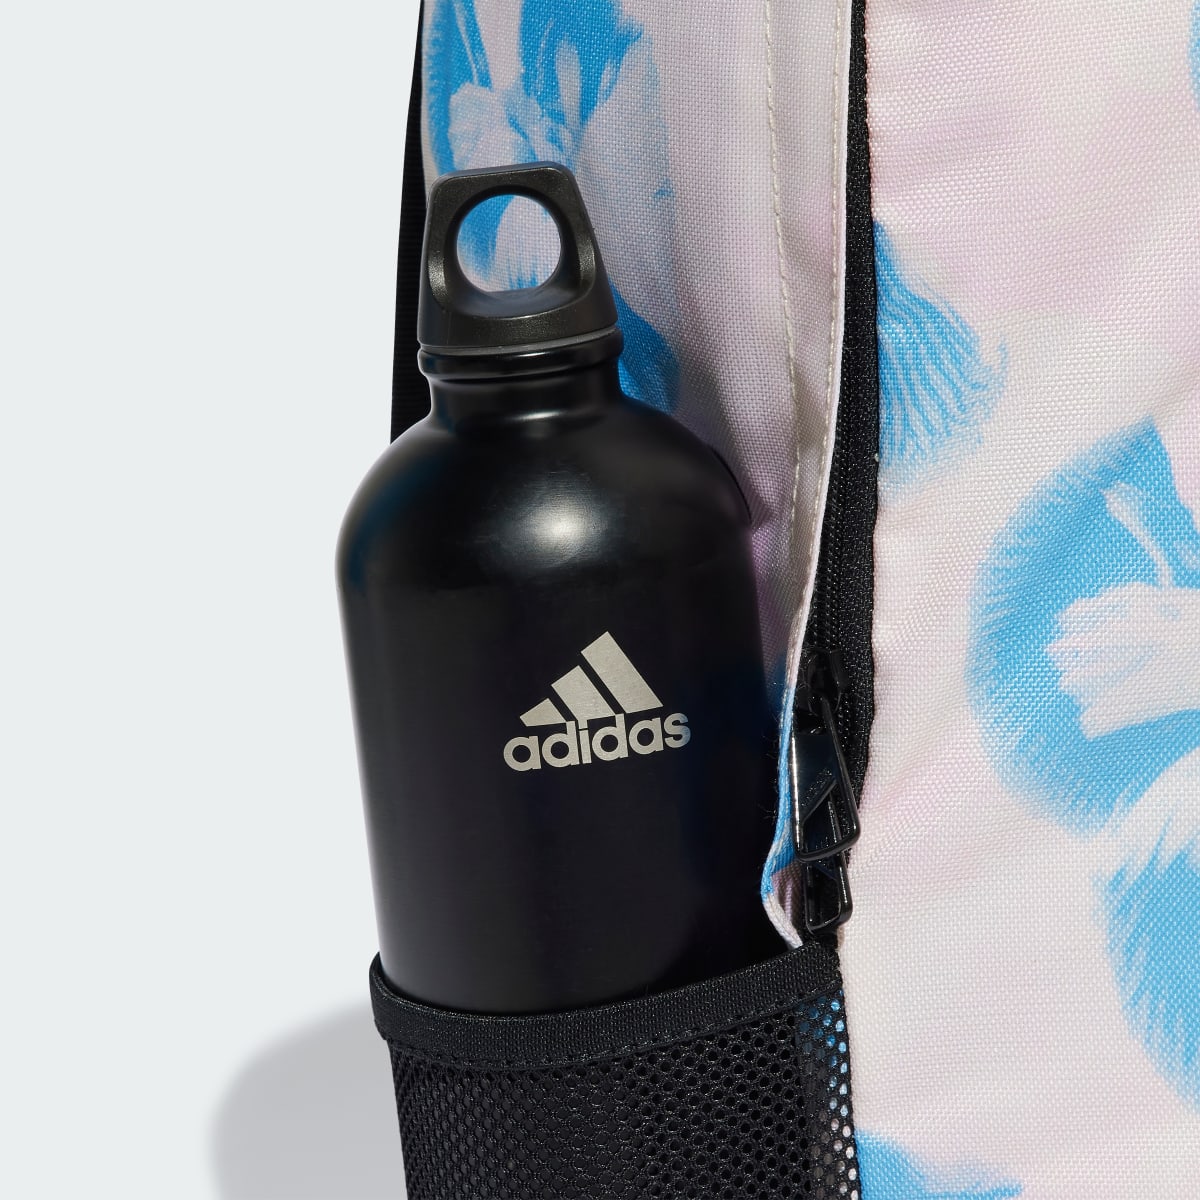 Adidas Linear Graphic Backpack. 4